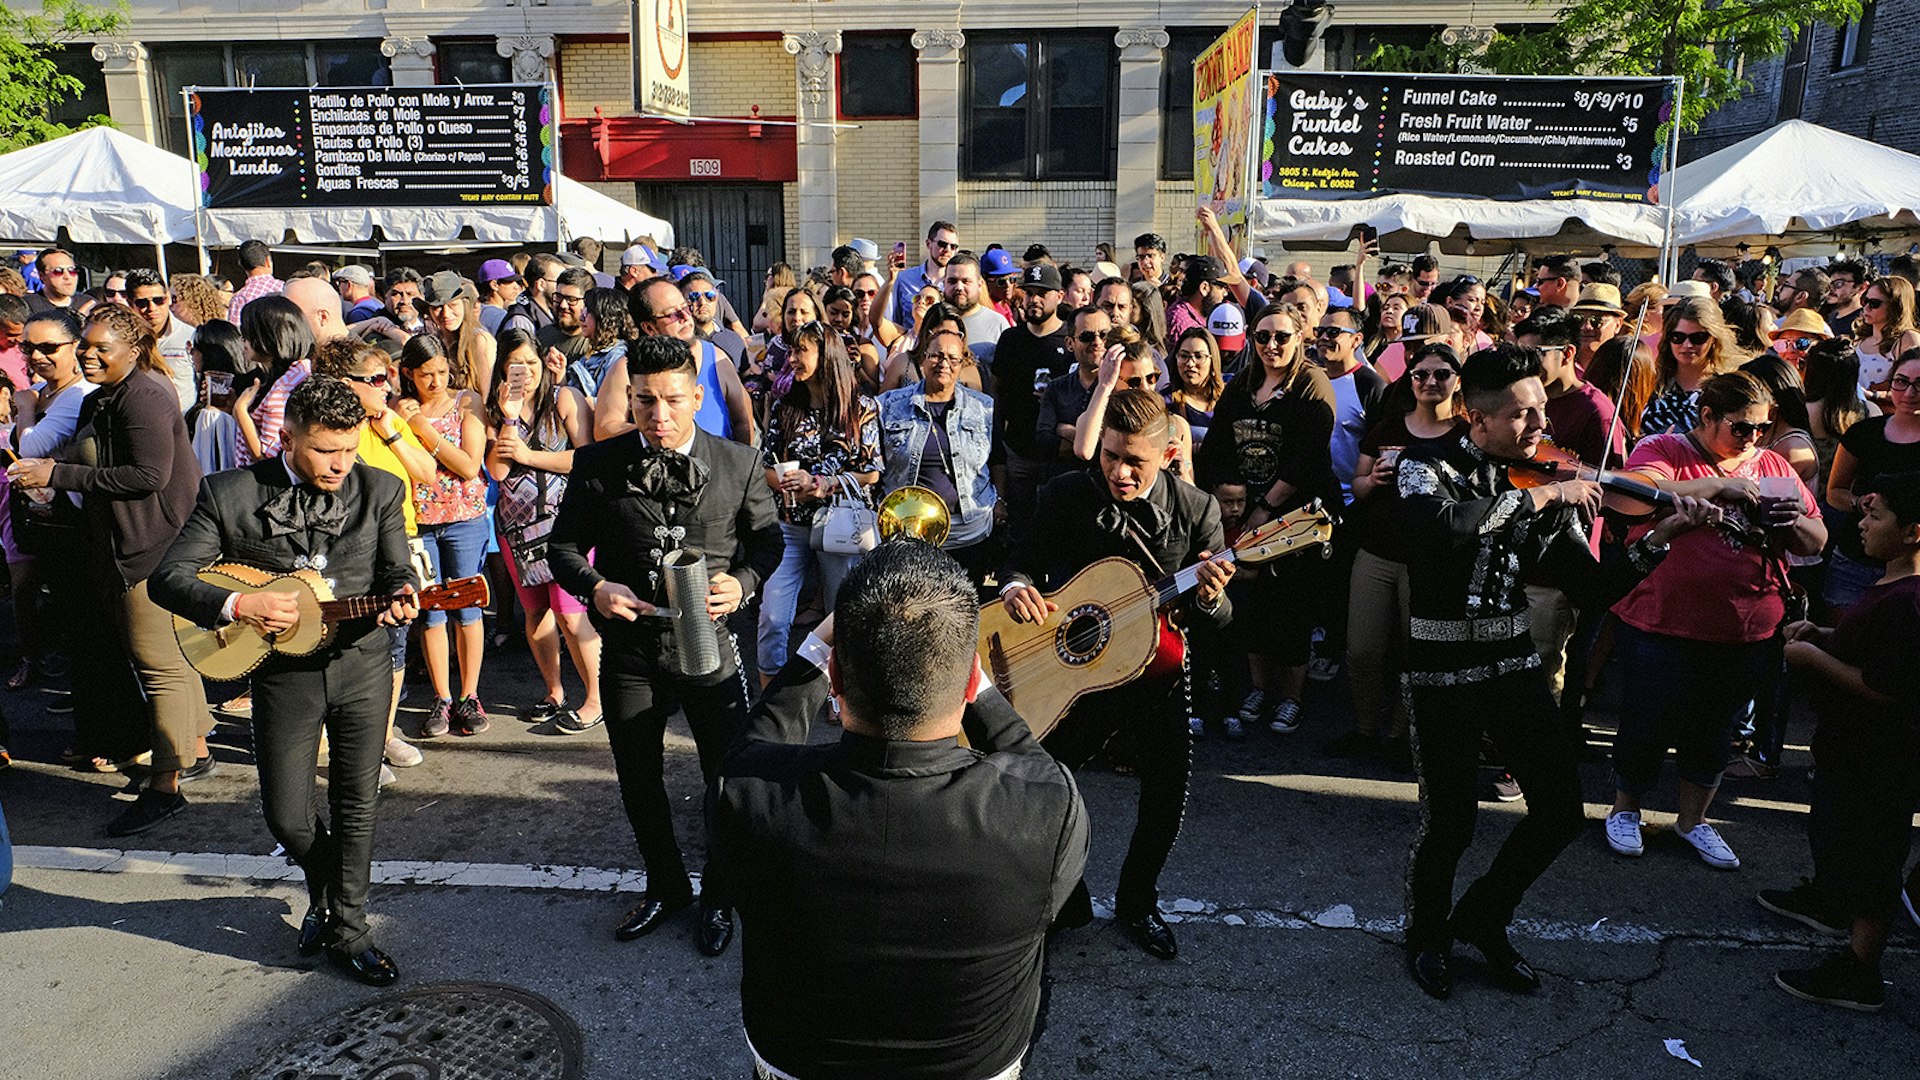 mariachi band performs in the streets in Chicago during Mole Fest